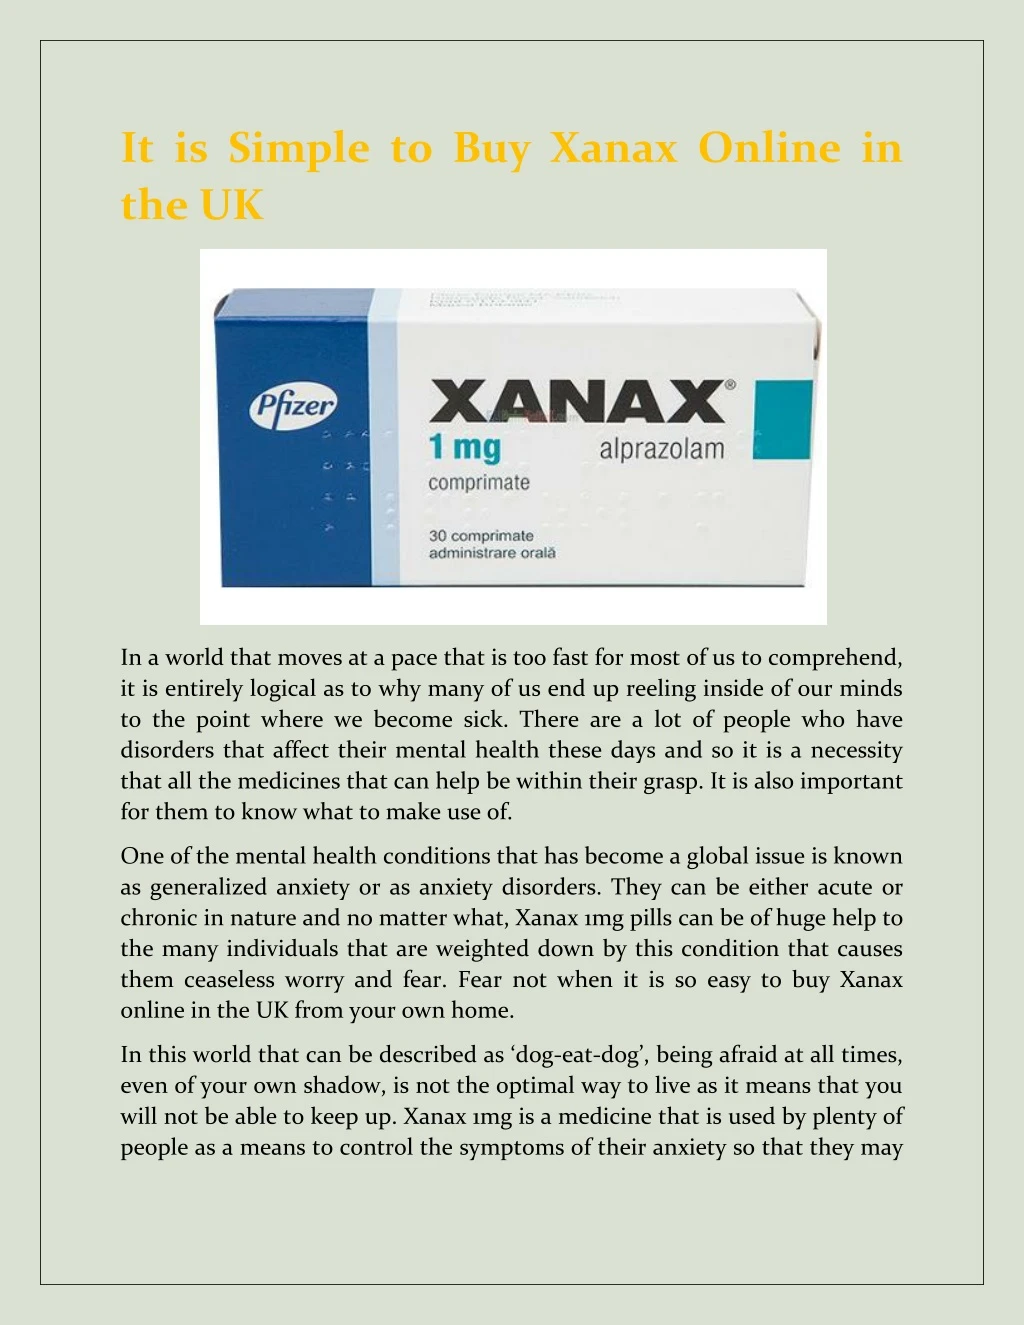 it is simple to buy xanax online in the uk